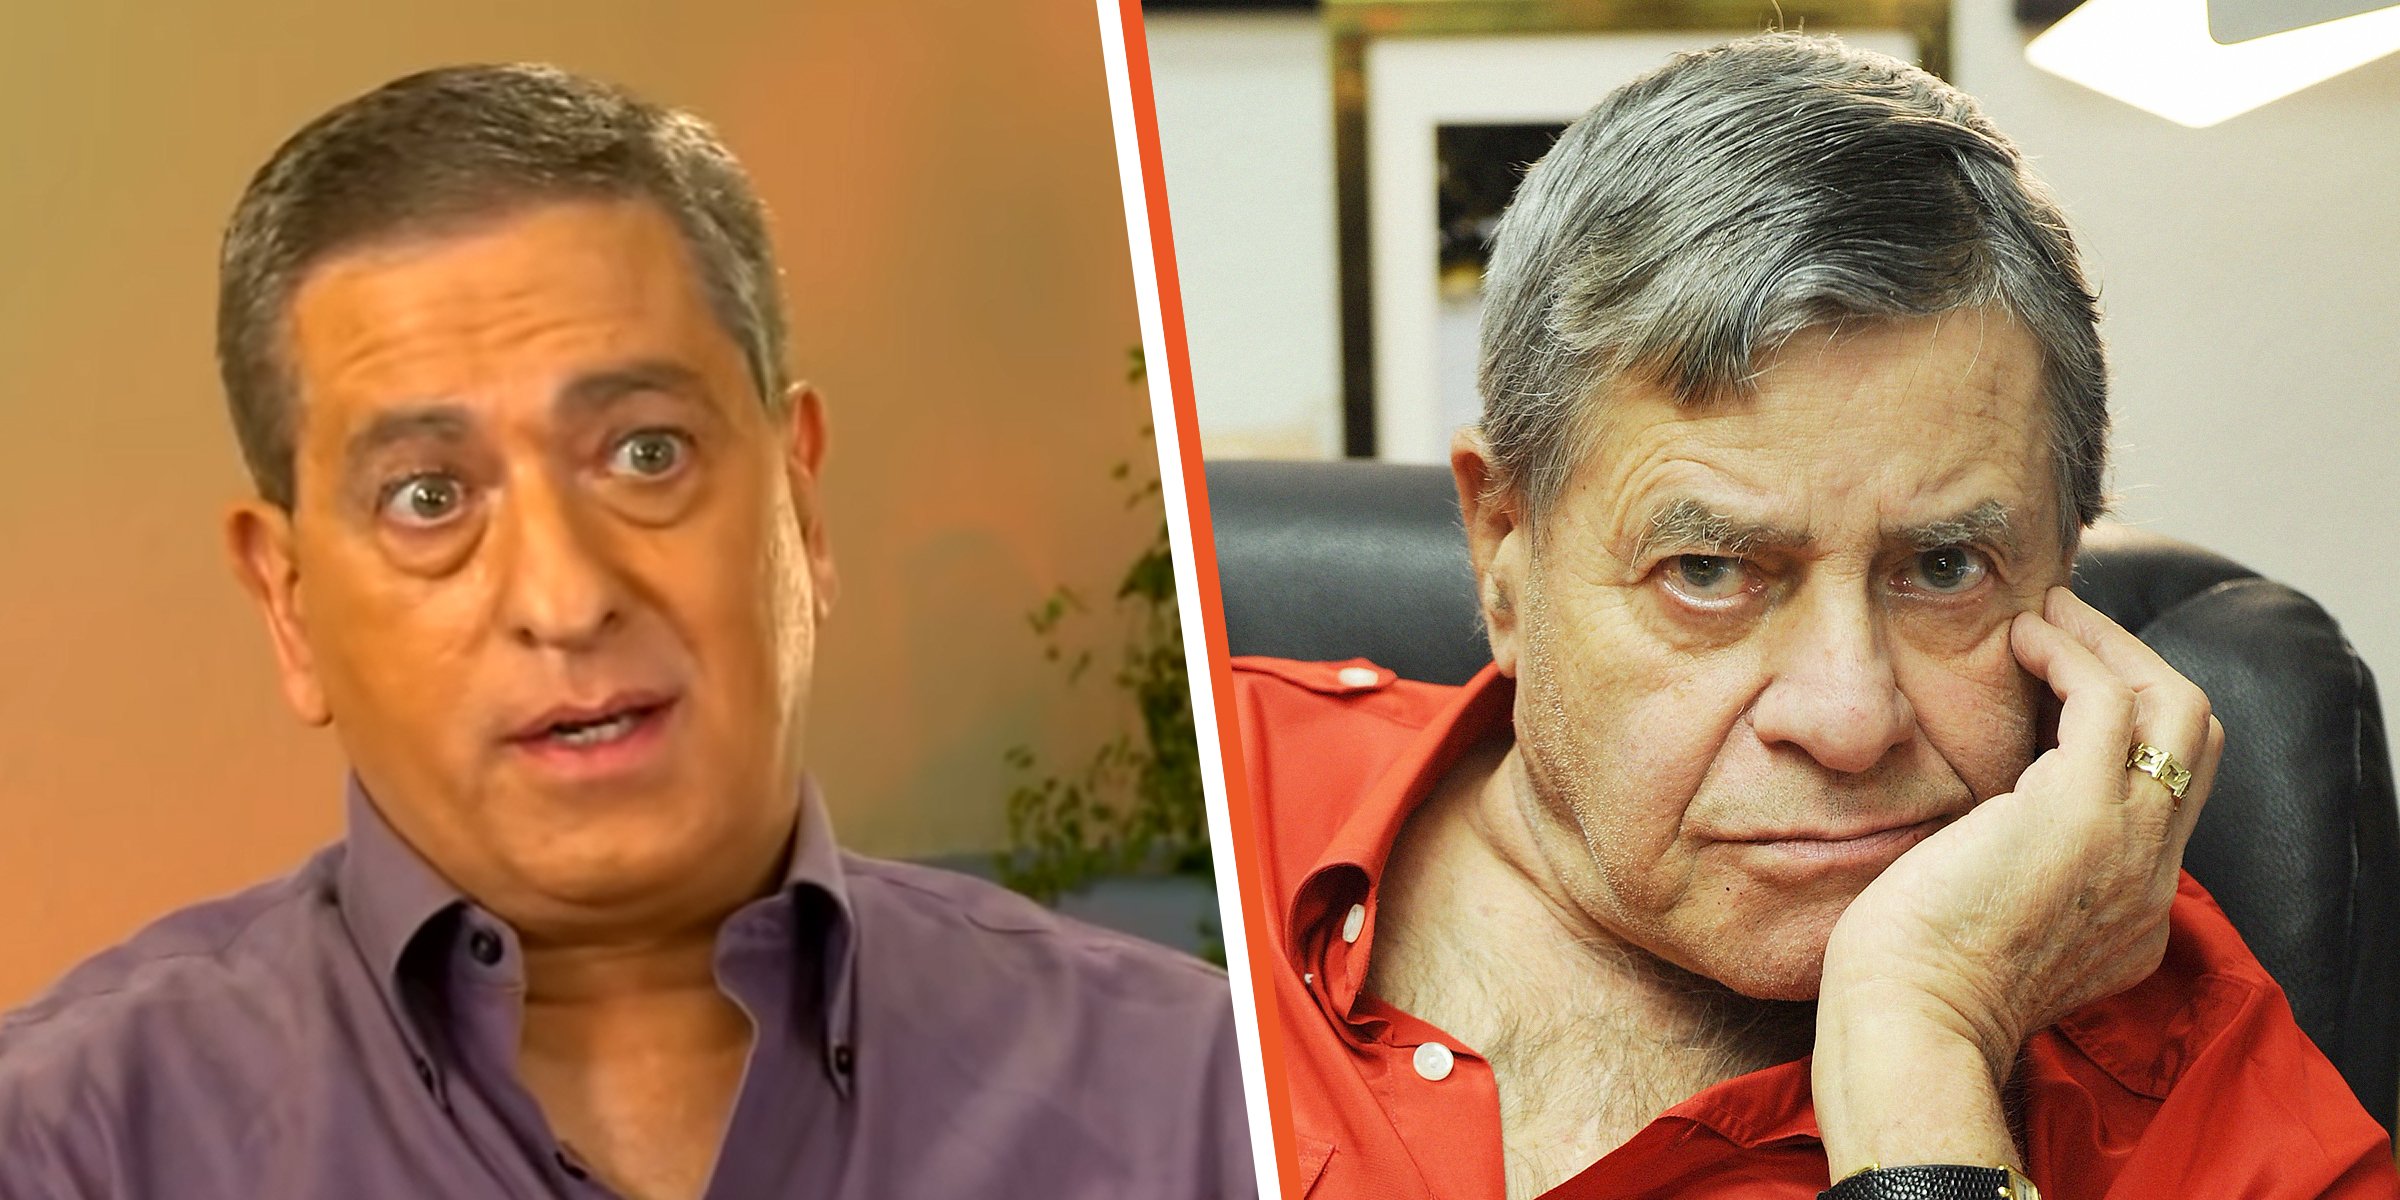 Anthony Lewis [L] | Jerry Lewis [R] | Source: youtube.com/Inside Edition | Getty Images